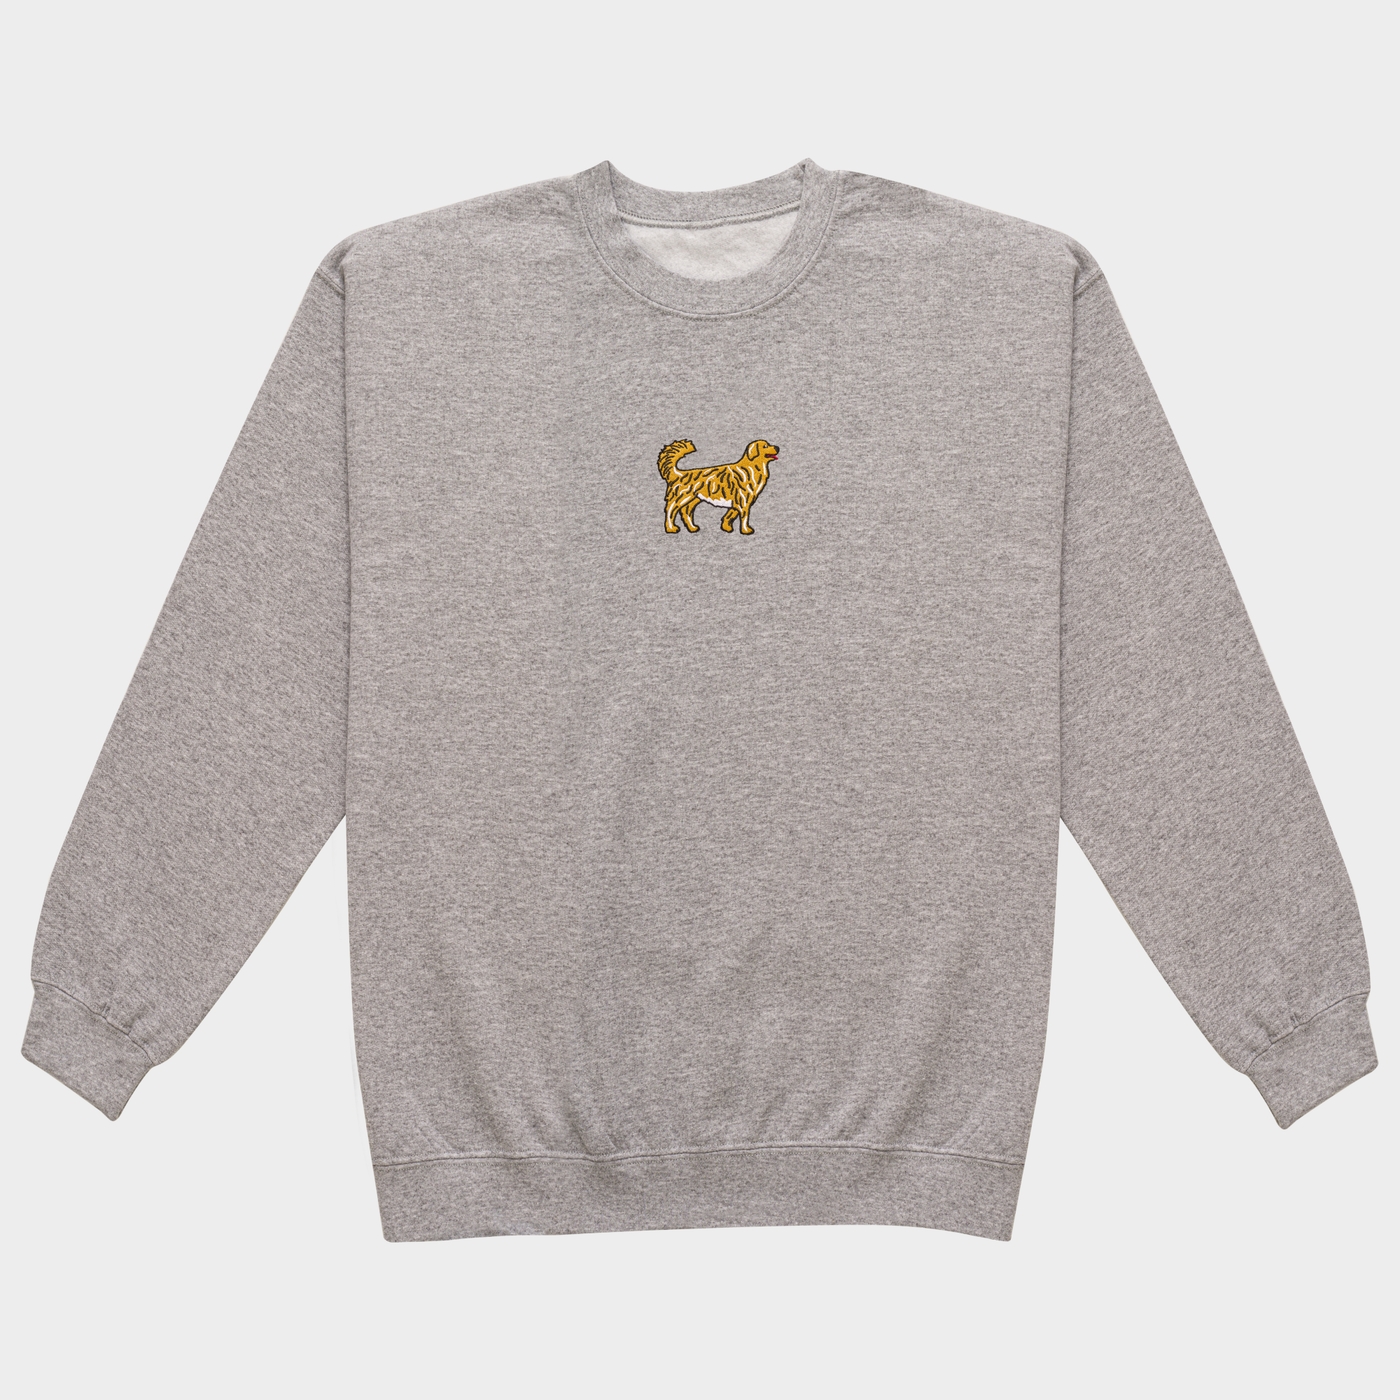 Bobby's Planet Men's Embroidered Golden Retriever Sweatshirt from Paws Dog Cat Animals Collection in Sport Grey Color#color_sport-grey